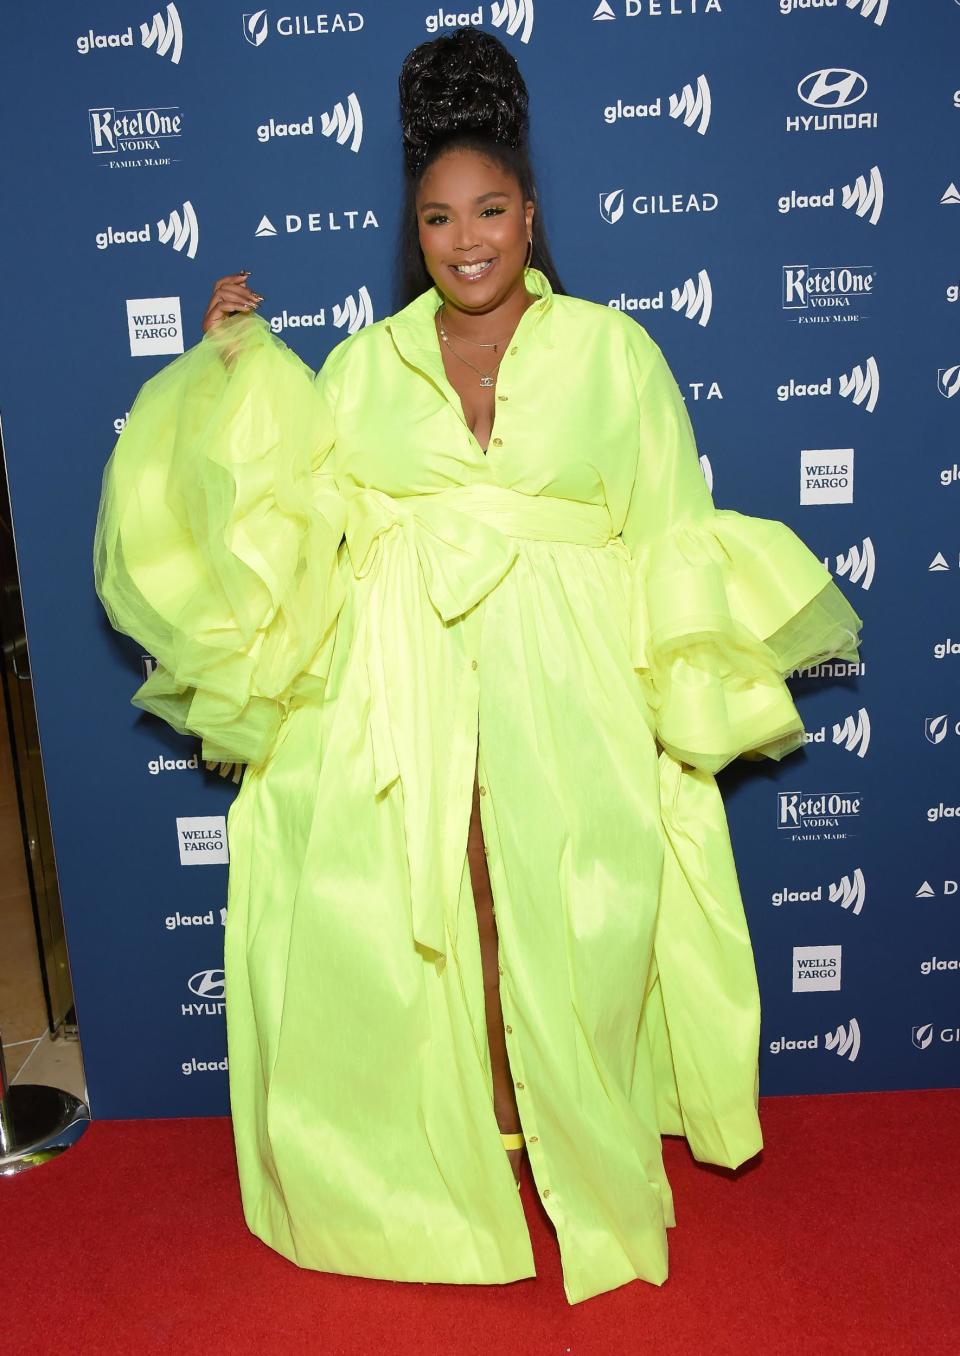 Lizzo at the GLAAD Awards (Getty Images)